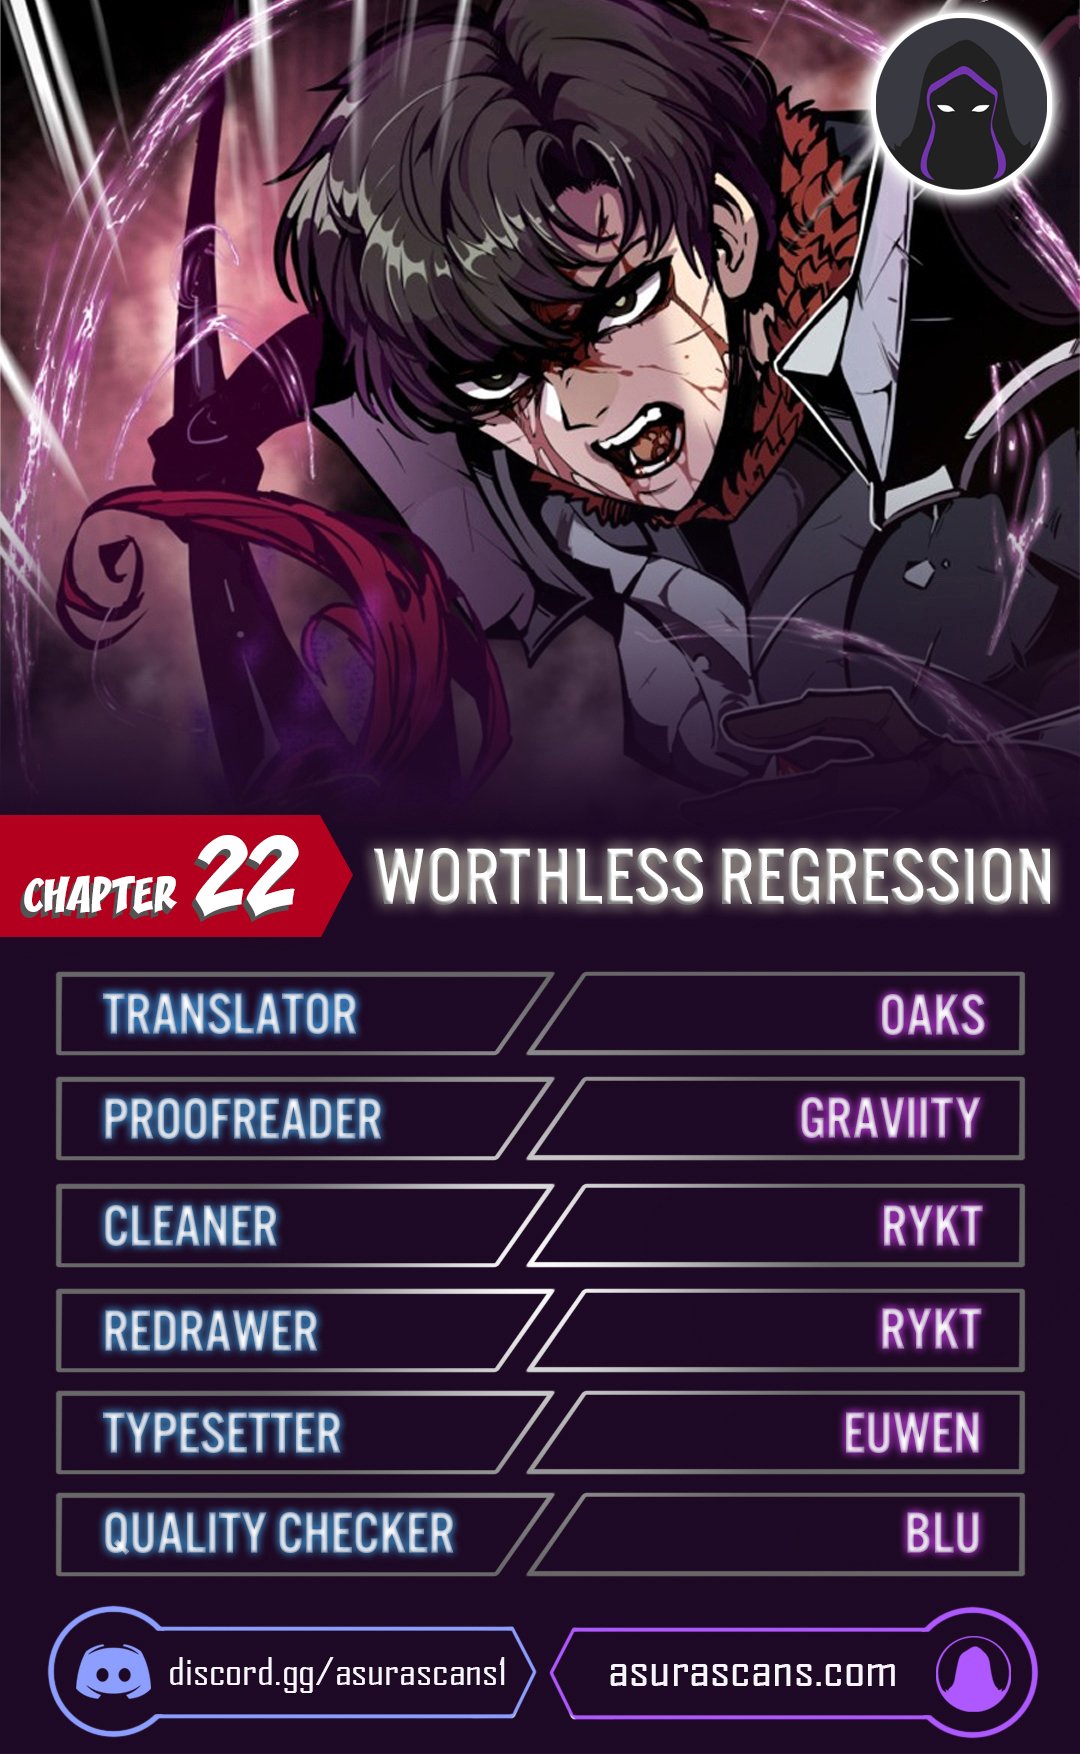 Worthless Regression - Chapter 20460 - Image 1